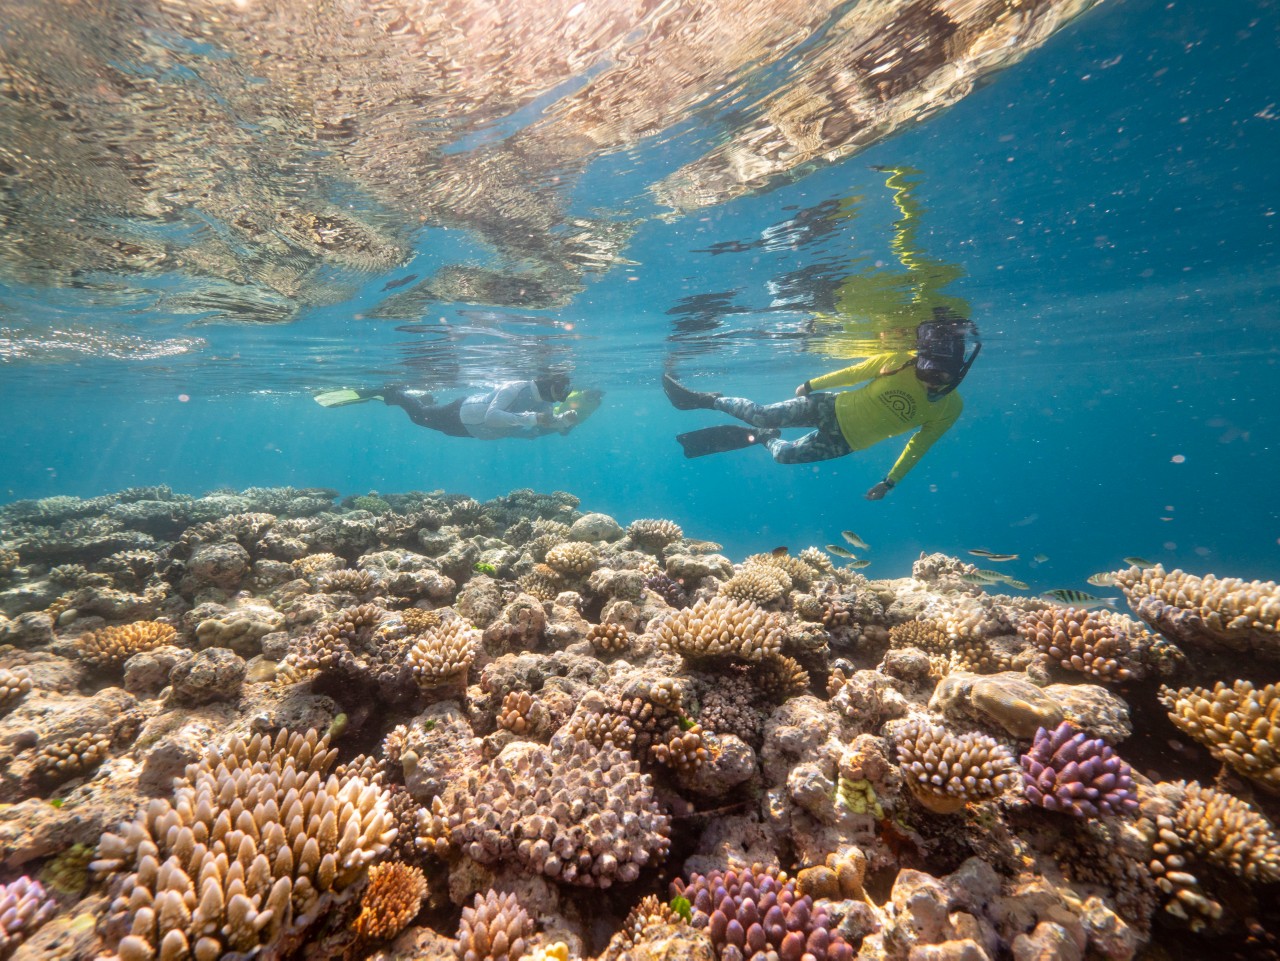 Explore The Great Barrier Reef With A Master Reef Guide Experience